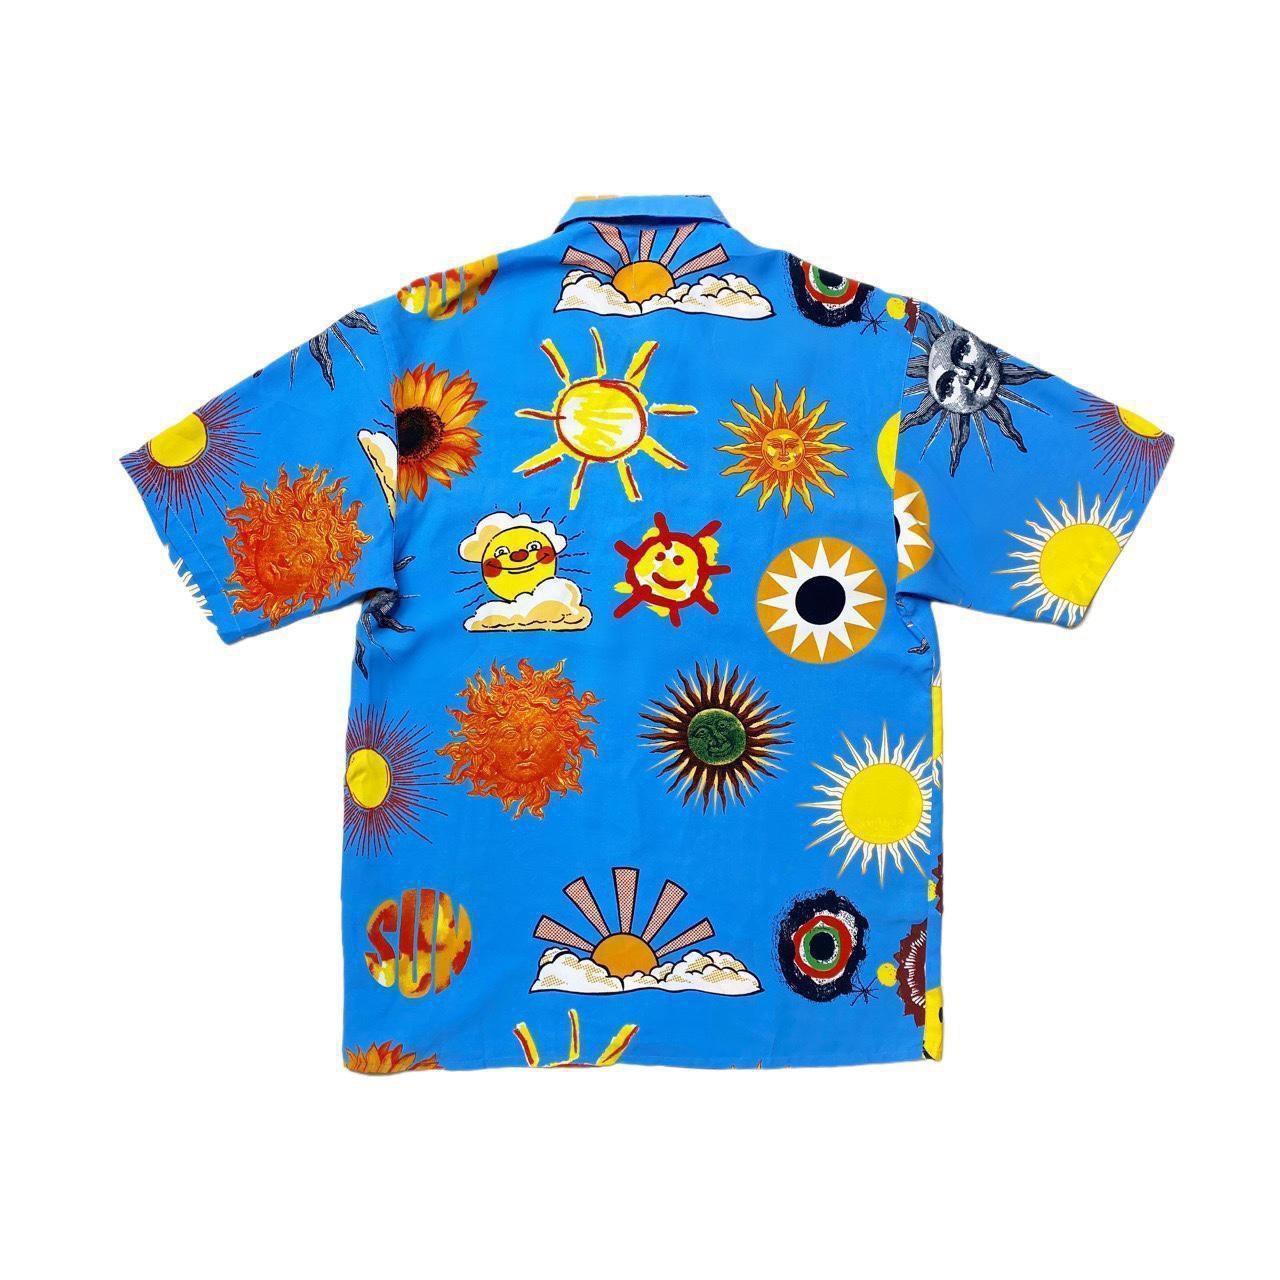 Moschino Printed Sun Shirt  In Good Condition For Sale In London, GB